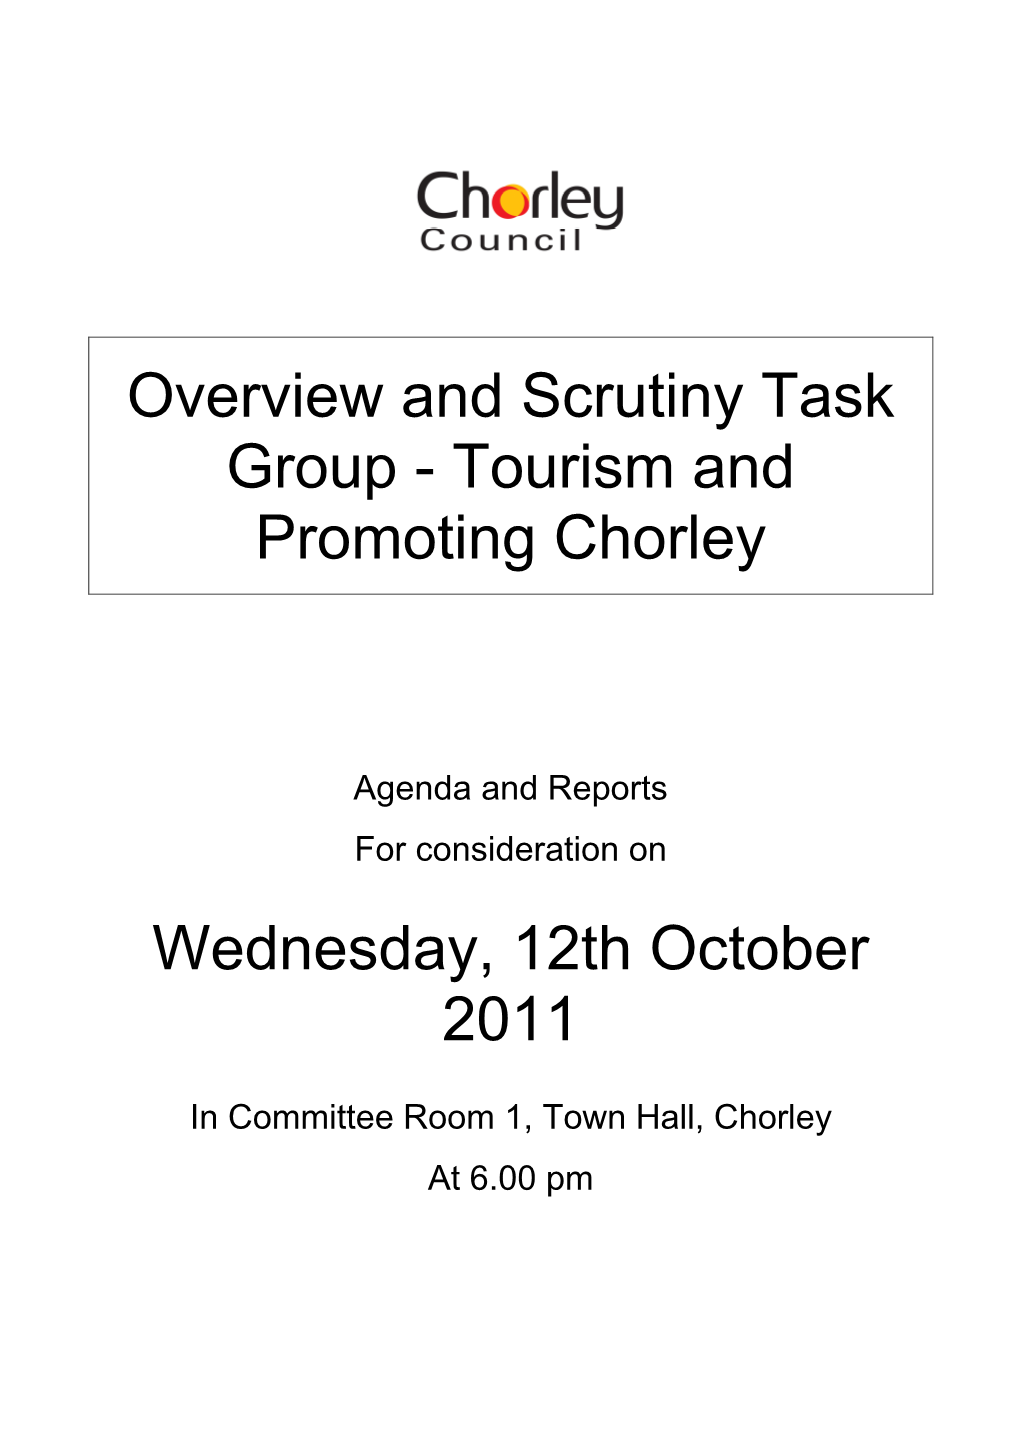 Overview and Scrutiny Task Group - Tourism and Promoting Chorley